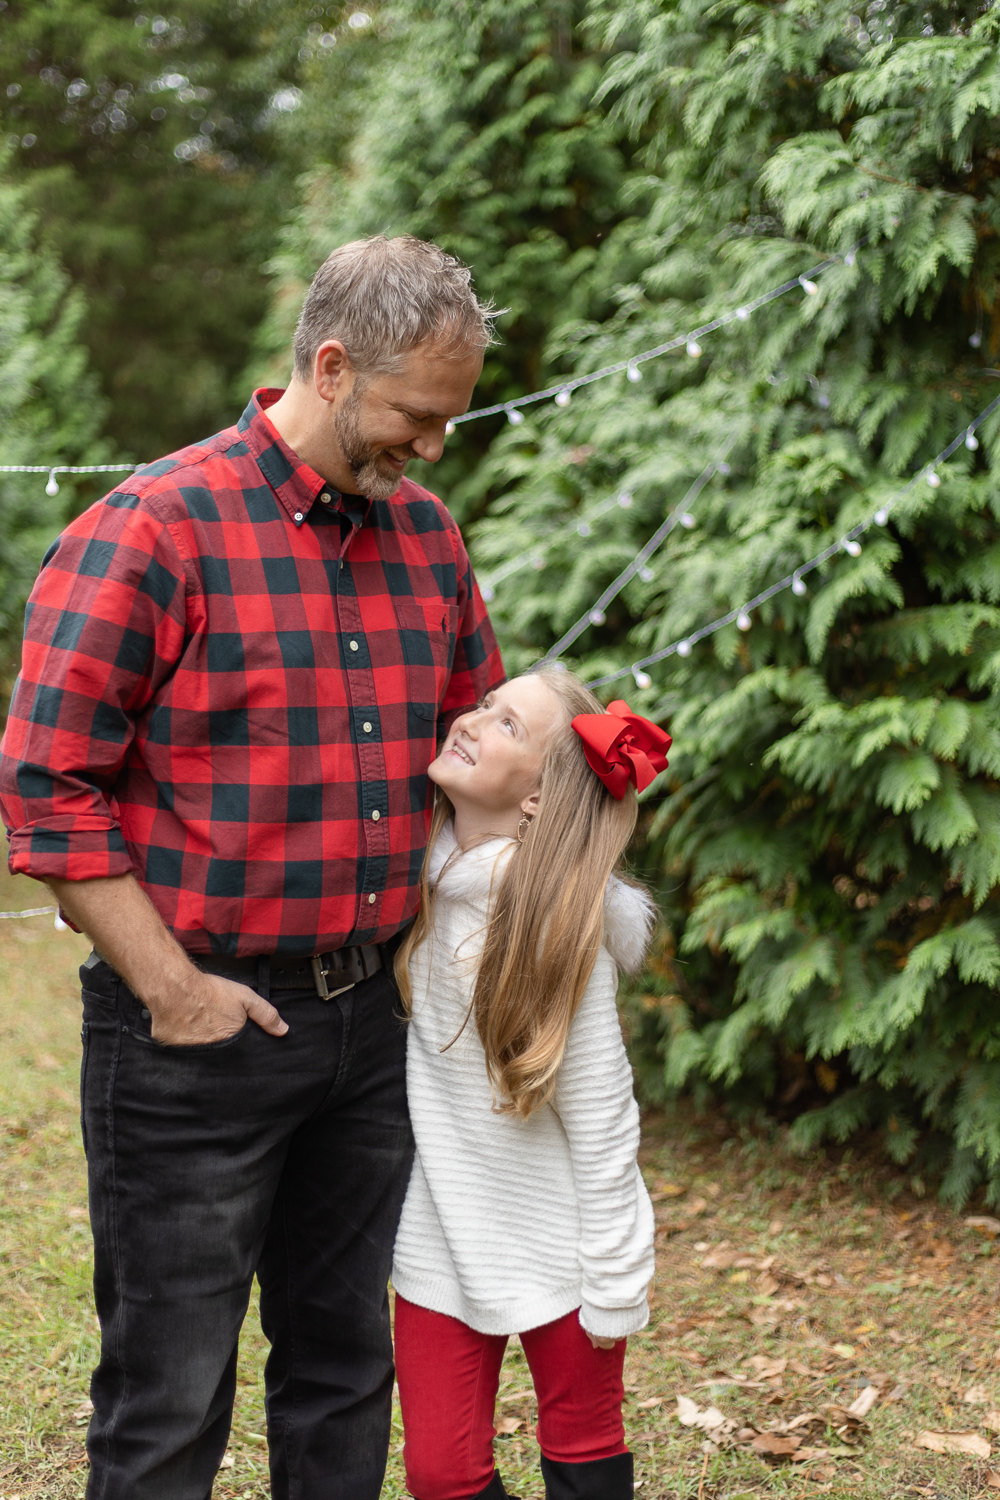 Daddy and daughter at Christmas Mini Session | Jade Alexandria Photography, Huntsville, Alabama Portrait Photographer.